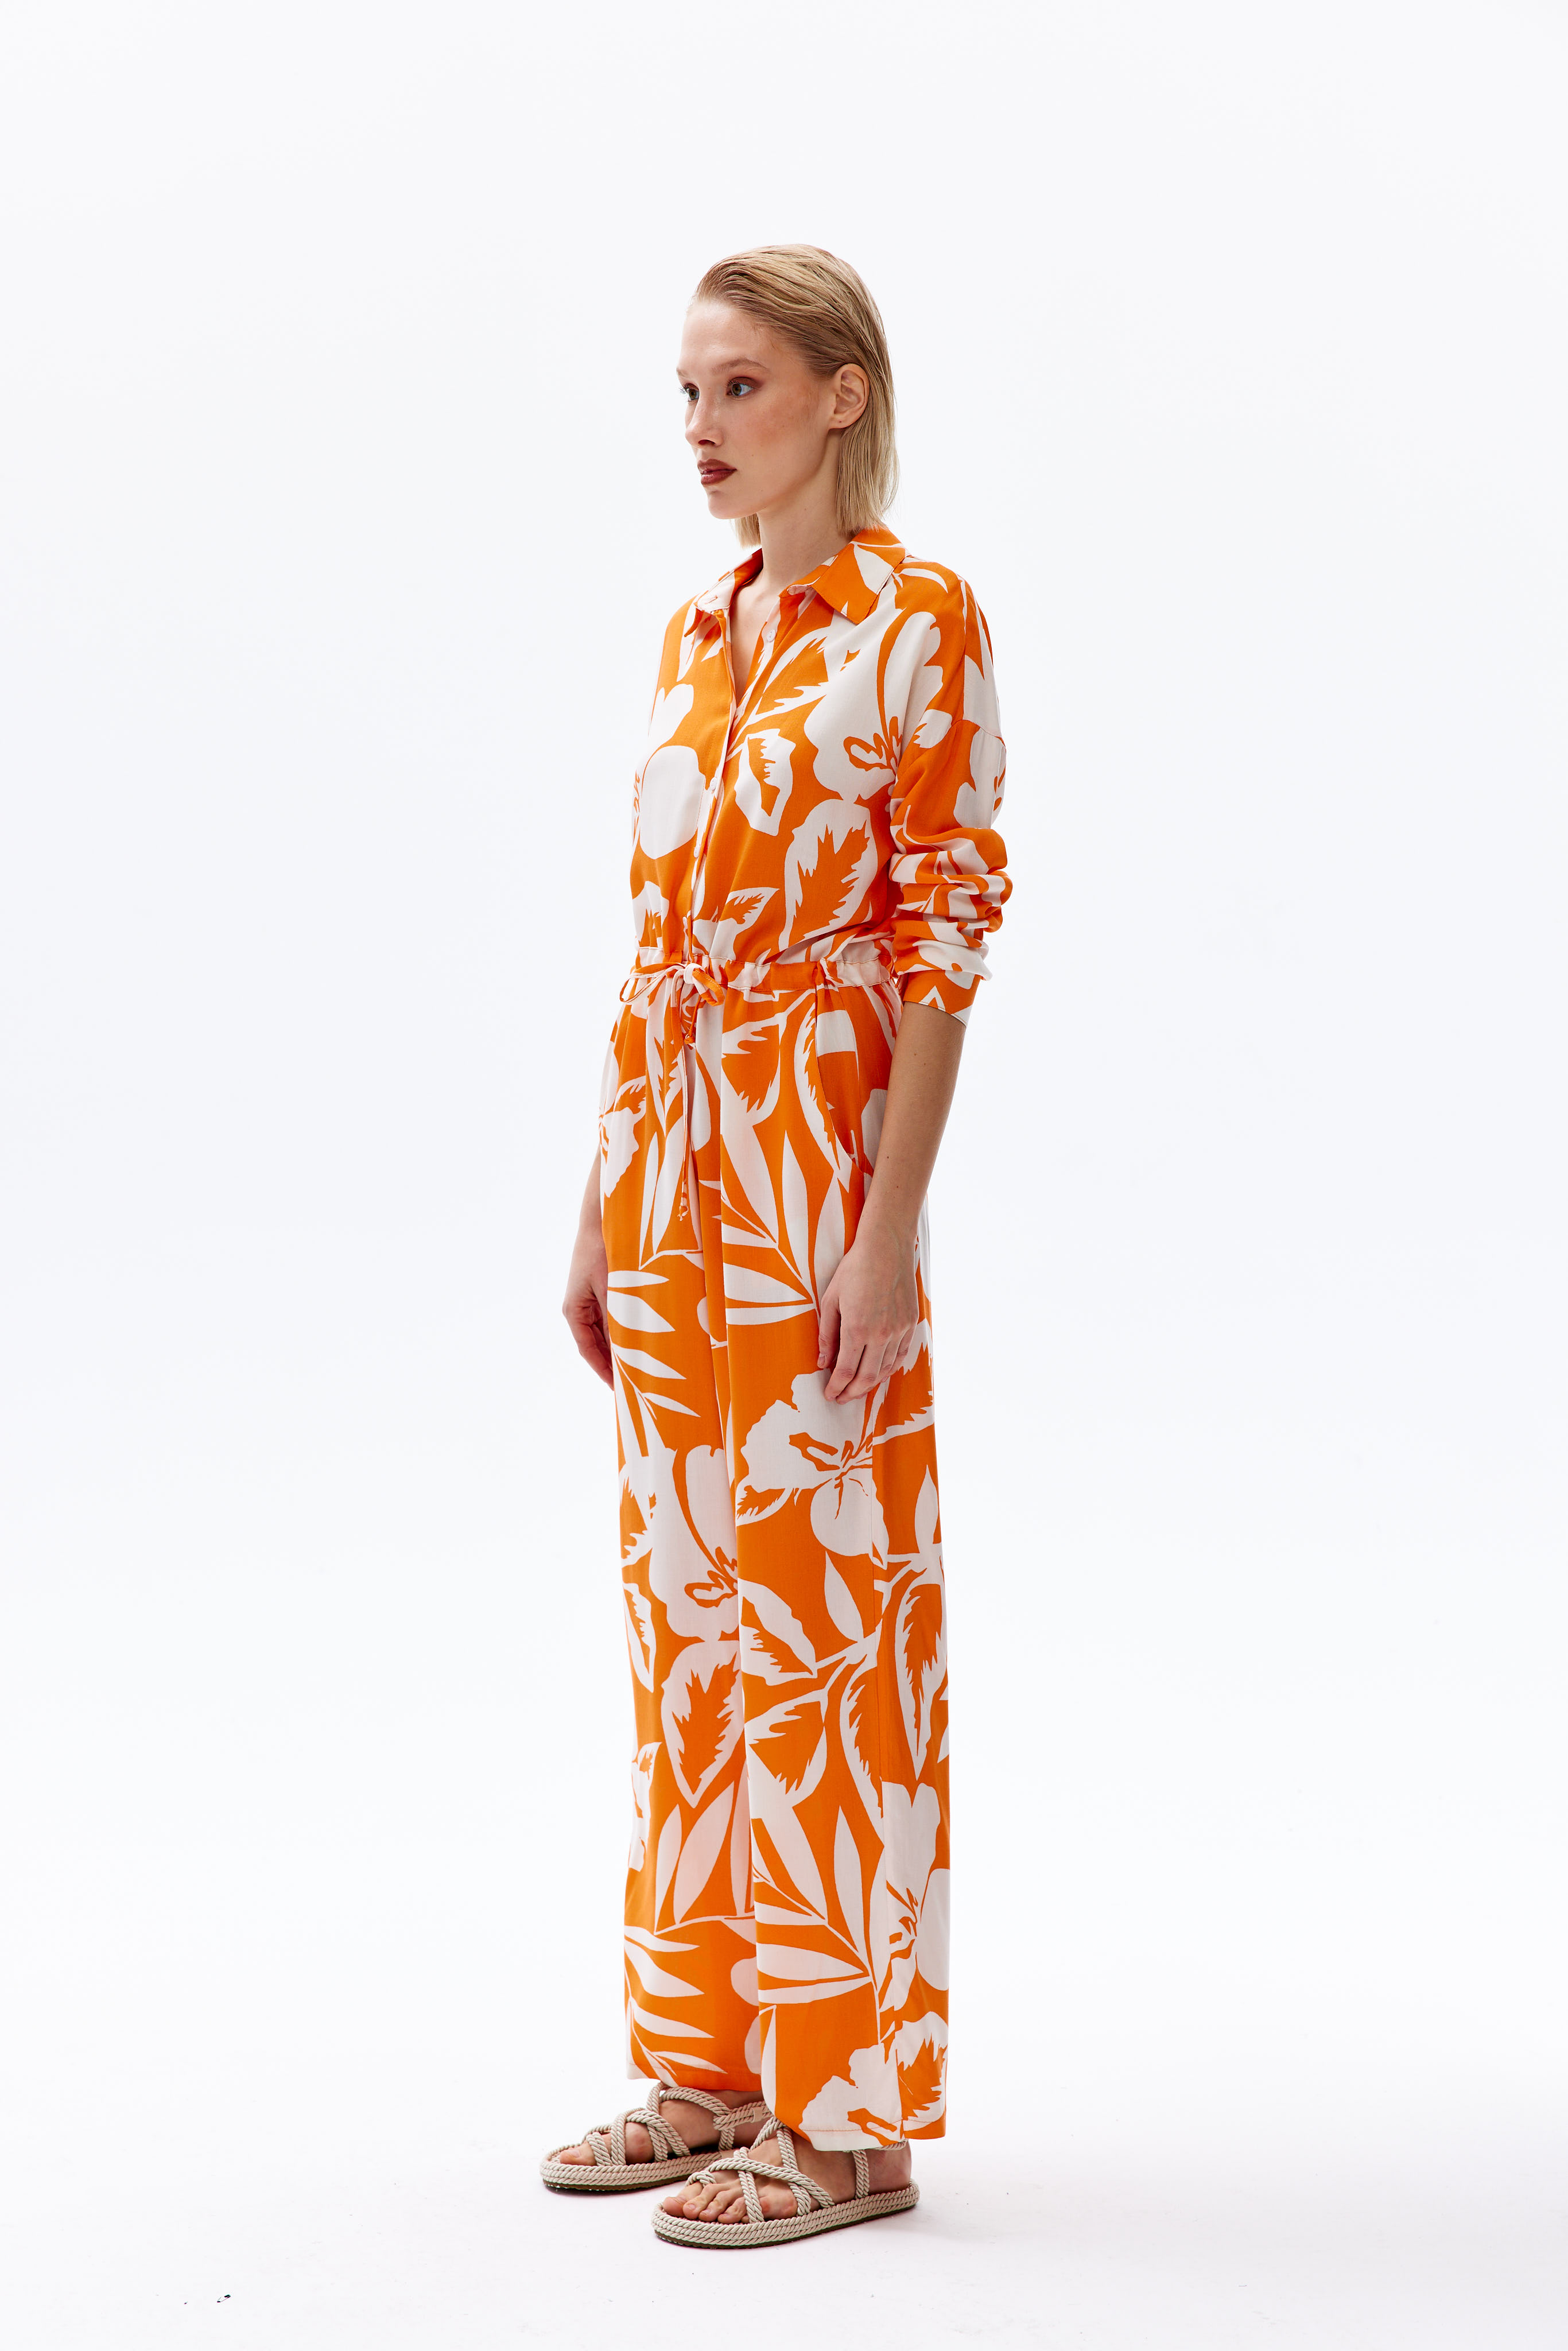 A model wears 44112 - Overalls - Orange, wholesale Jumpsuit of Cream Rouge to display at Lonca